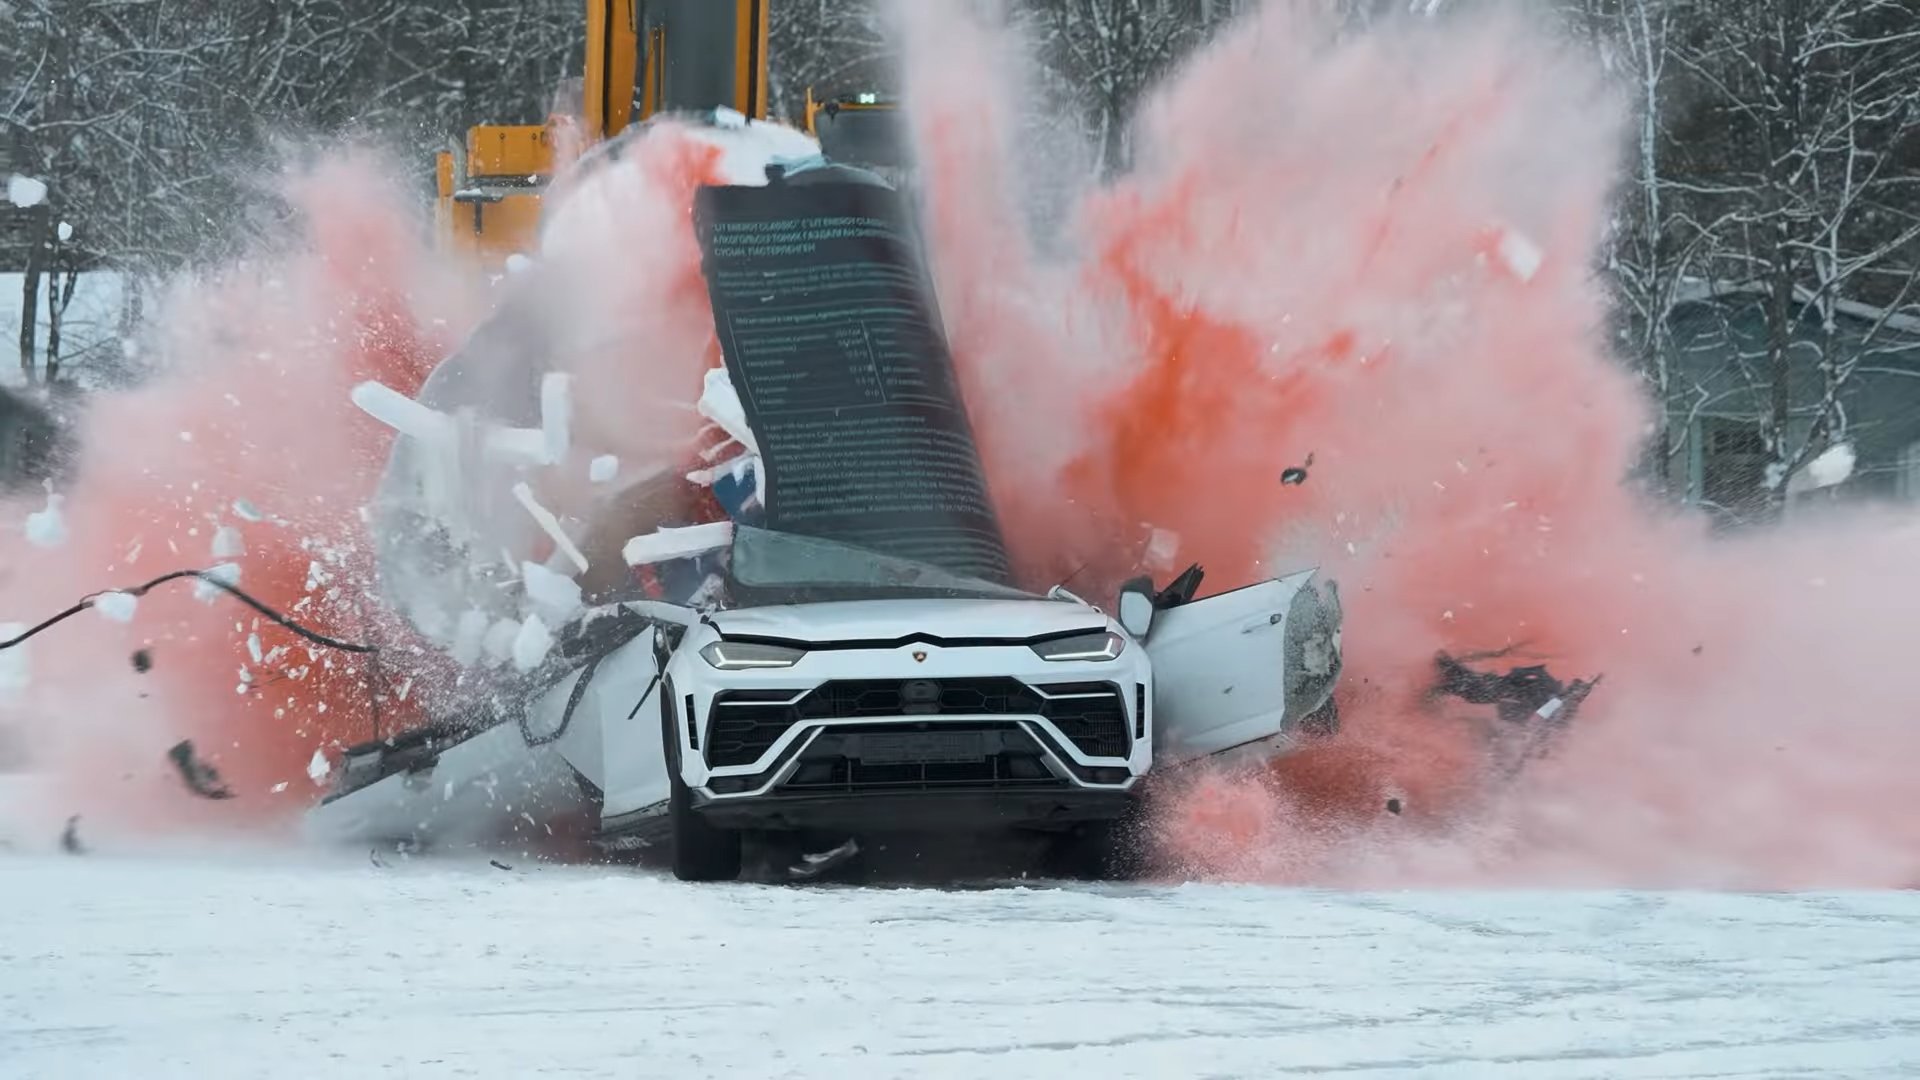 Zero2Turbo on X: Russin r Demolishes Lamborghini Urus With Giant  Energy Drink Crane Drop To create buzz and awareness around his new brand  he decided to develop a 3-ton can of the